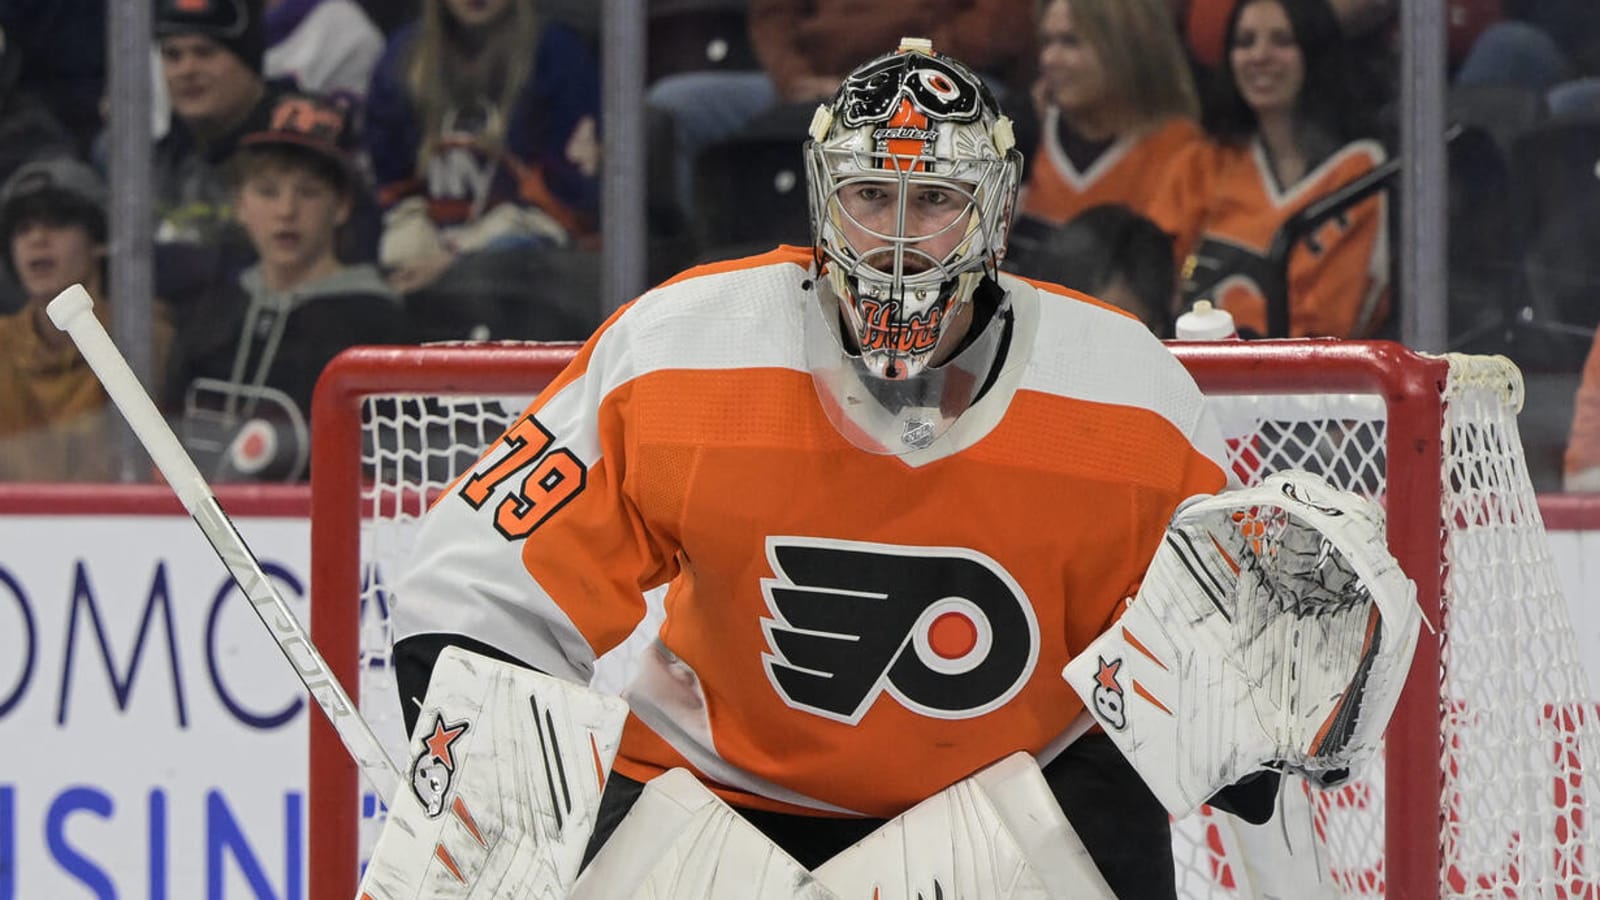 Watch: Flyers goalie gives up worst goal of the season